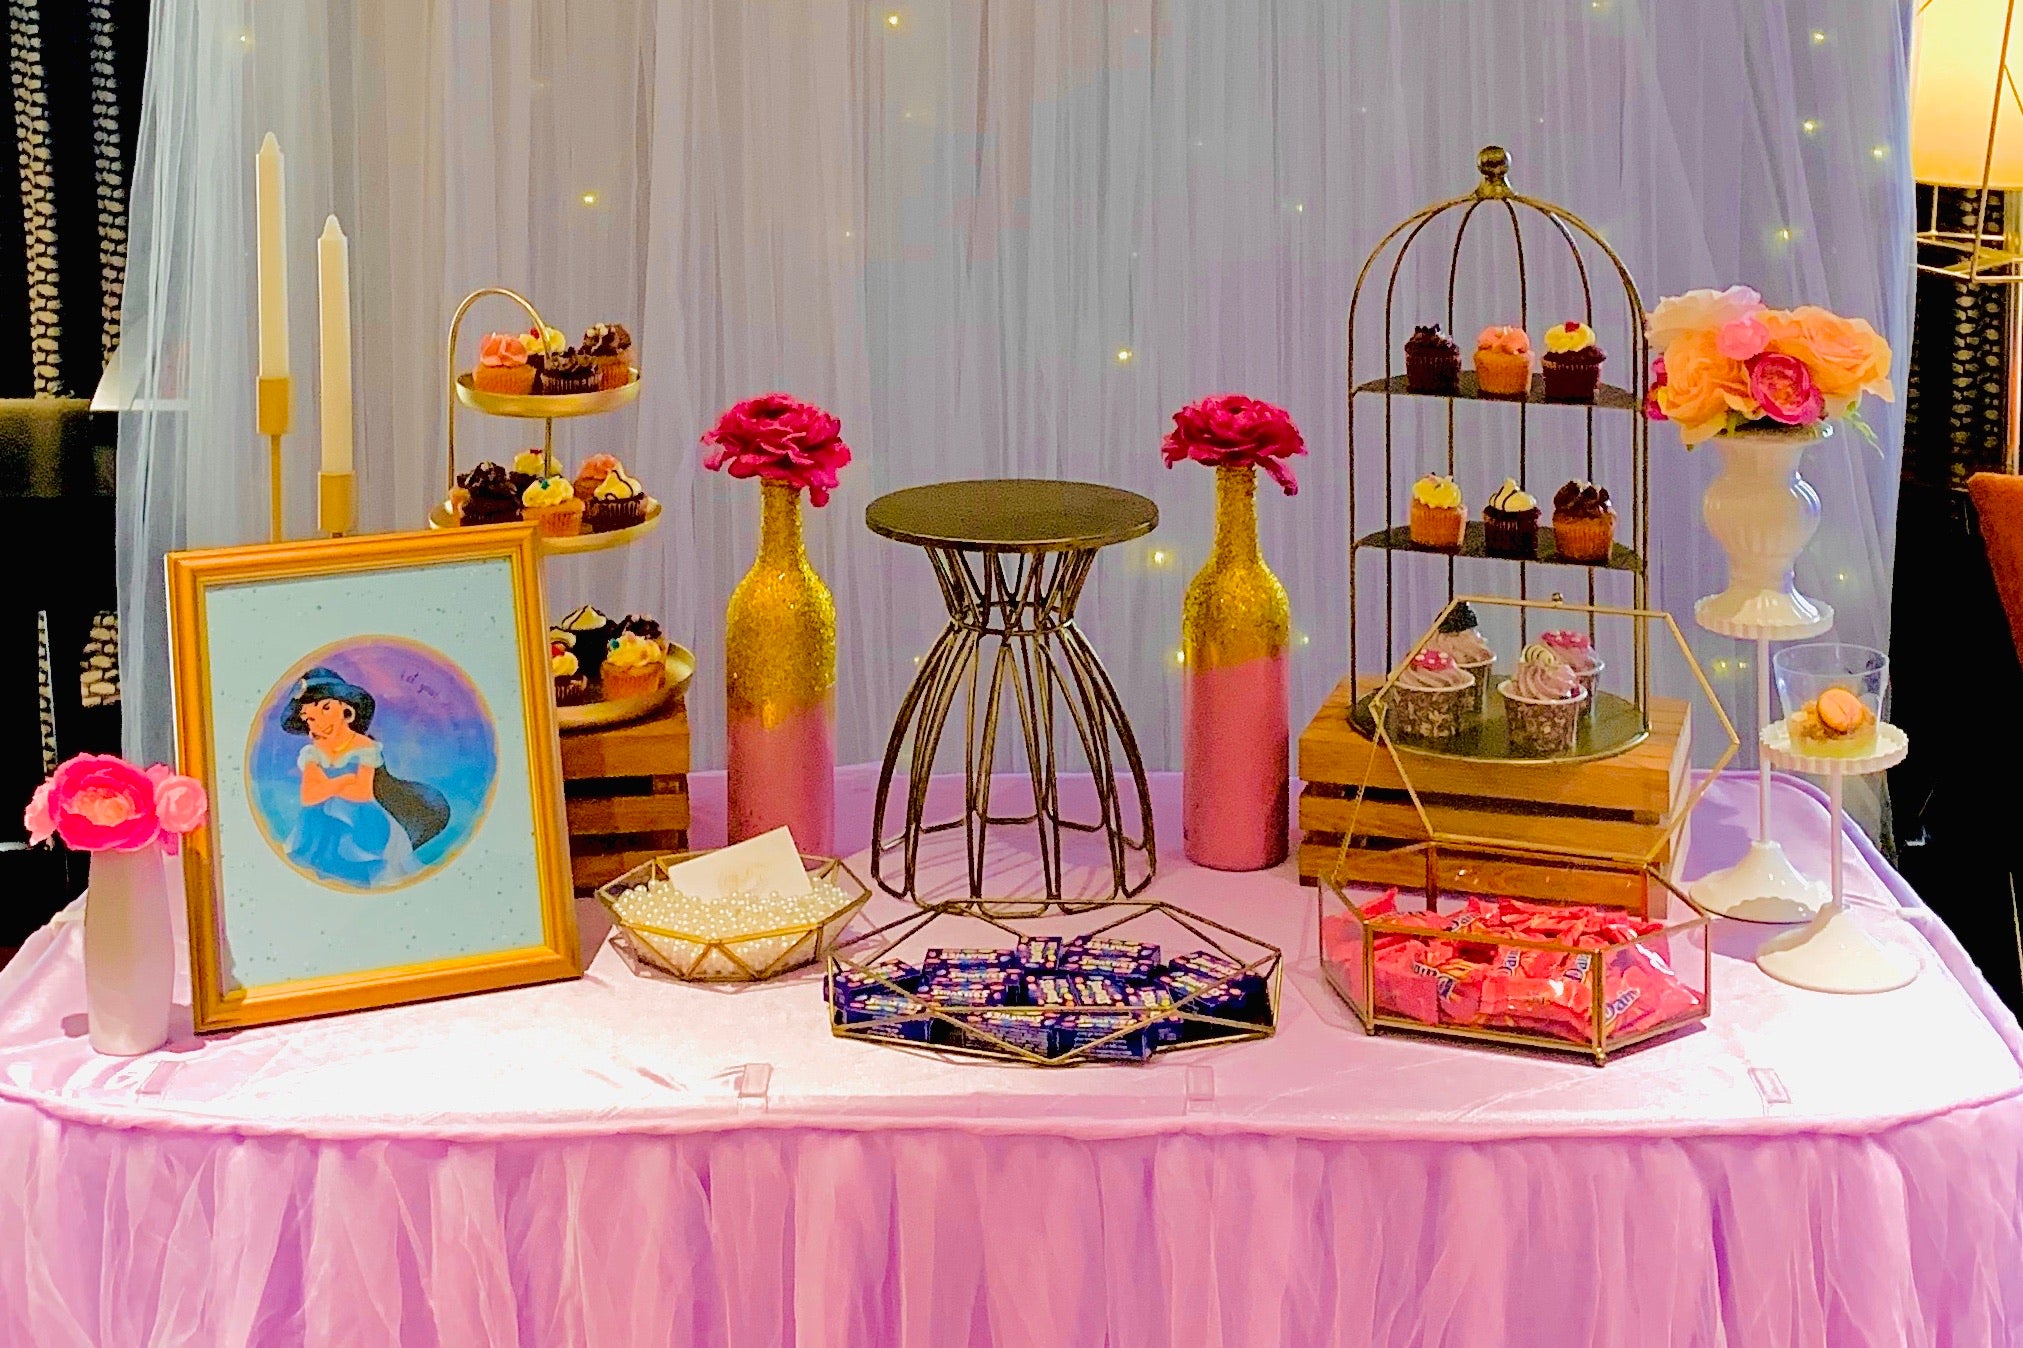 Princess Jasmine / Aladdin Dessert Table for Birthday Party by Style It Simply